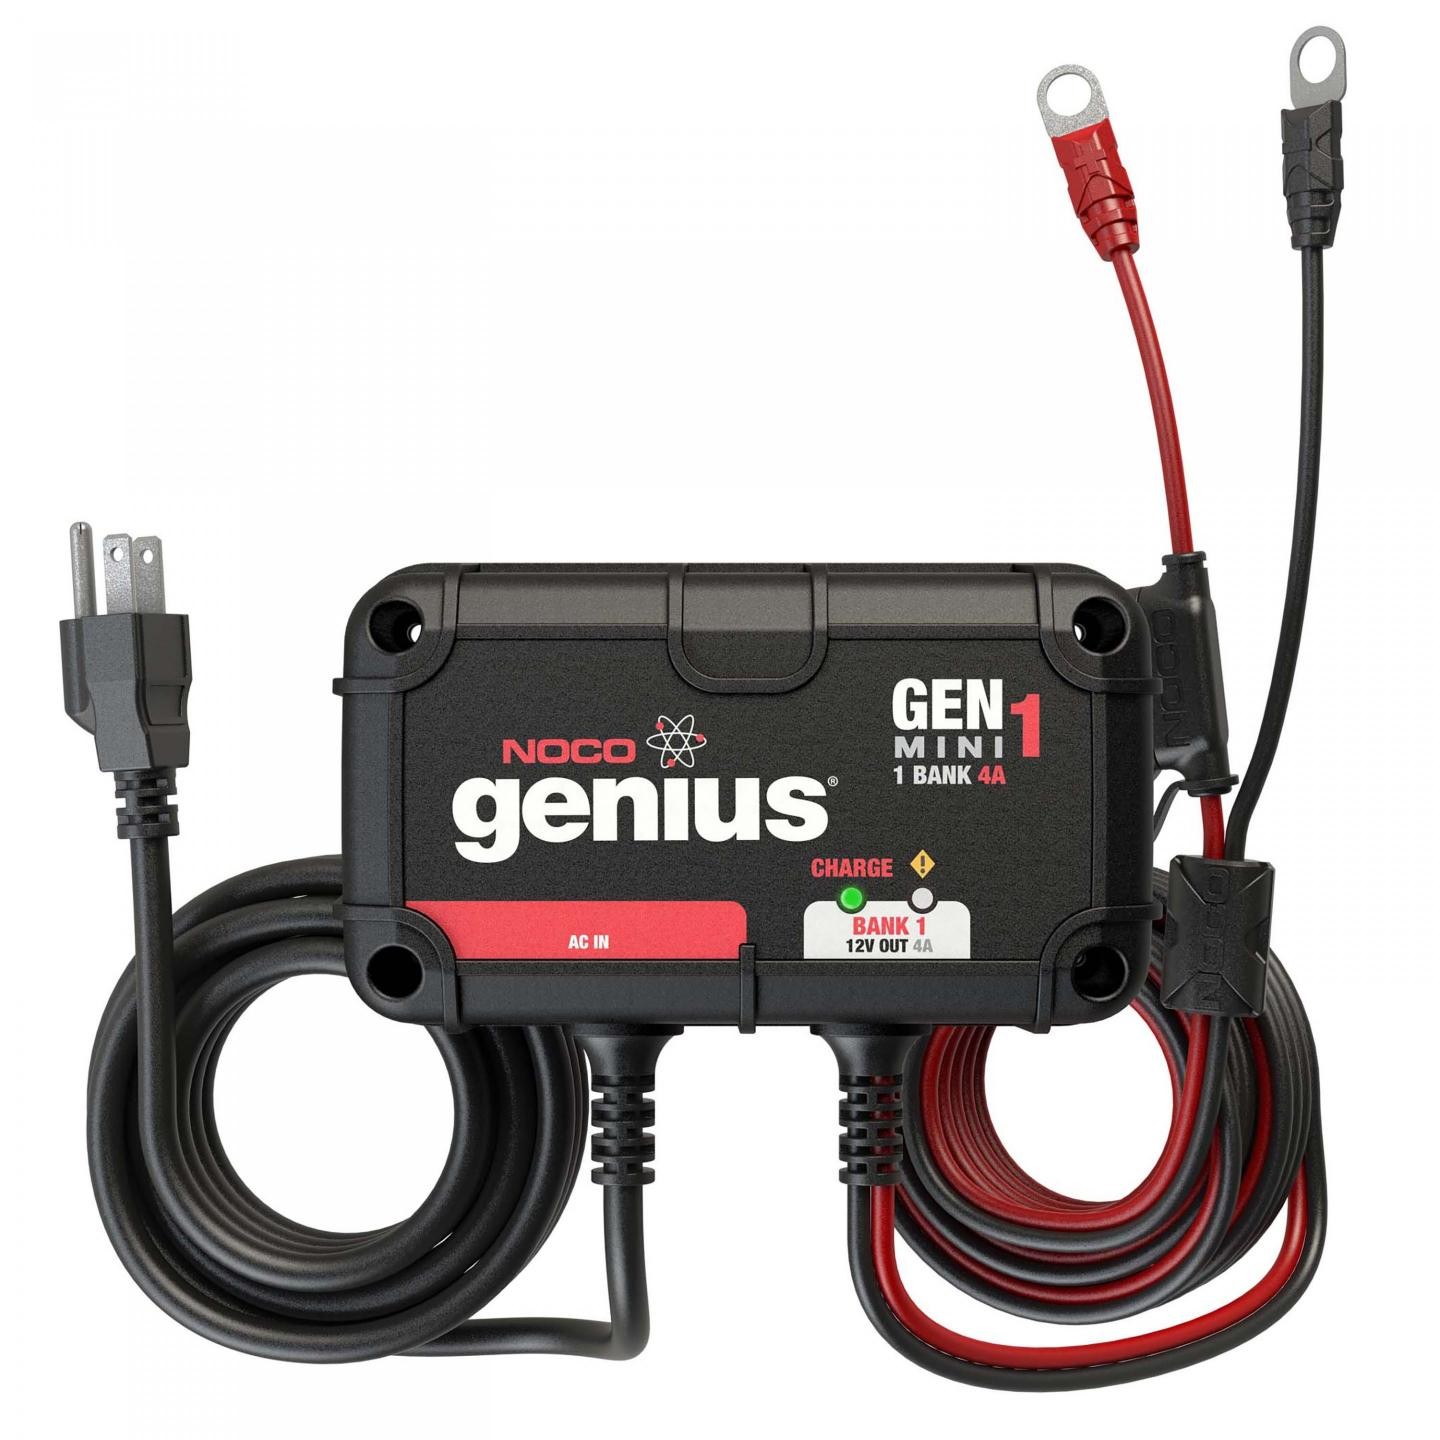 NOCO - 1-Bank 4A On-Board Battery Charger - GENM1